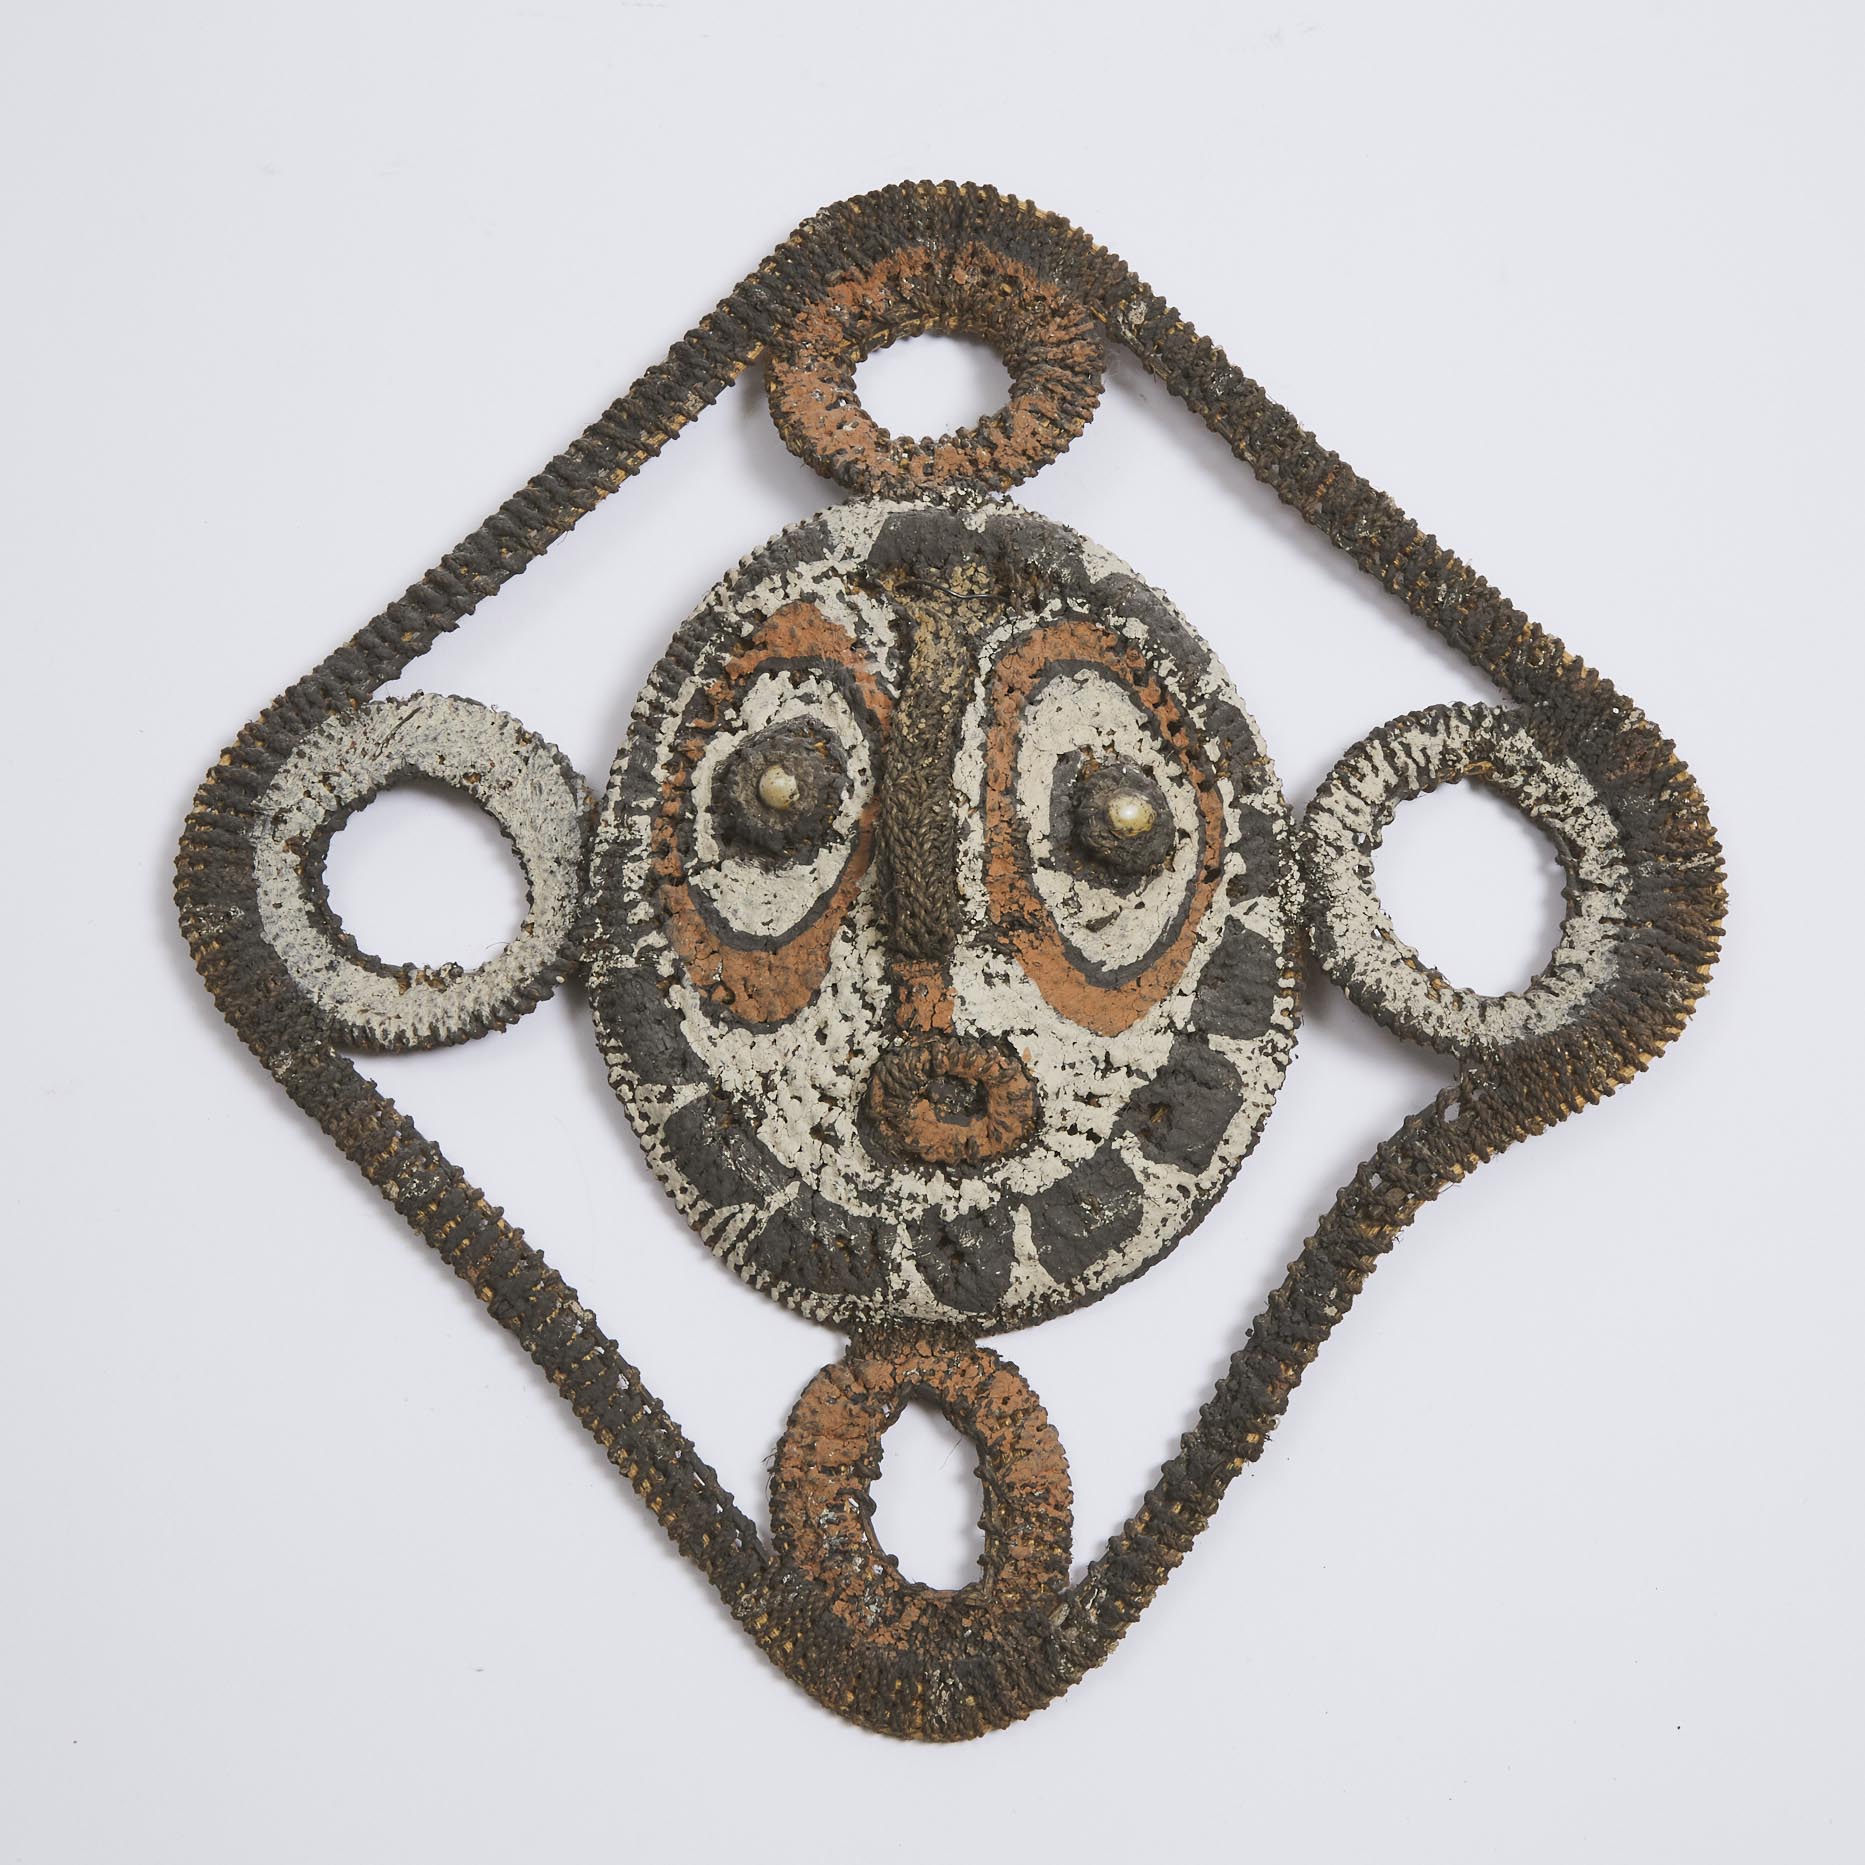 Sepik River Turtle Shell Mask, Papua New Guinea, early to mid 20th century